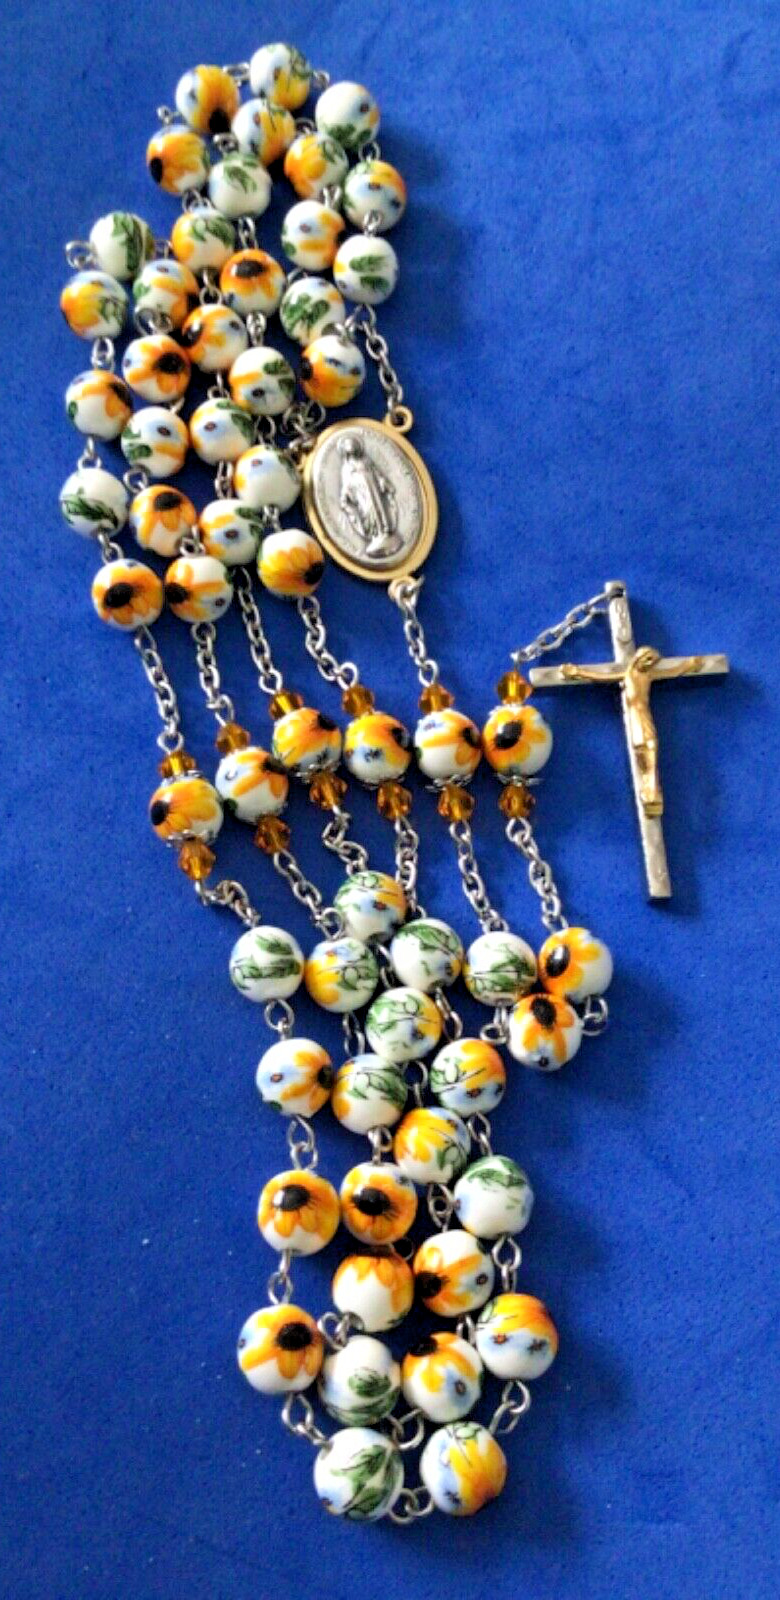 Porcelain Rosary SunFlowers Miraculous Two Tone Hand Made Crucifix Bead Caps 8mm